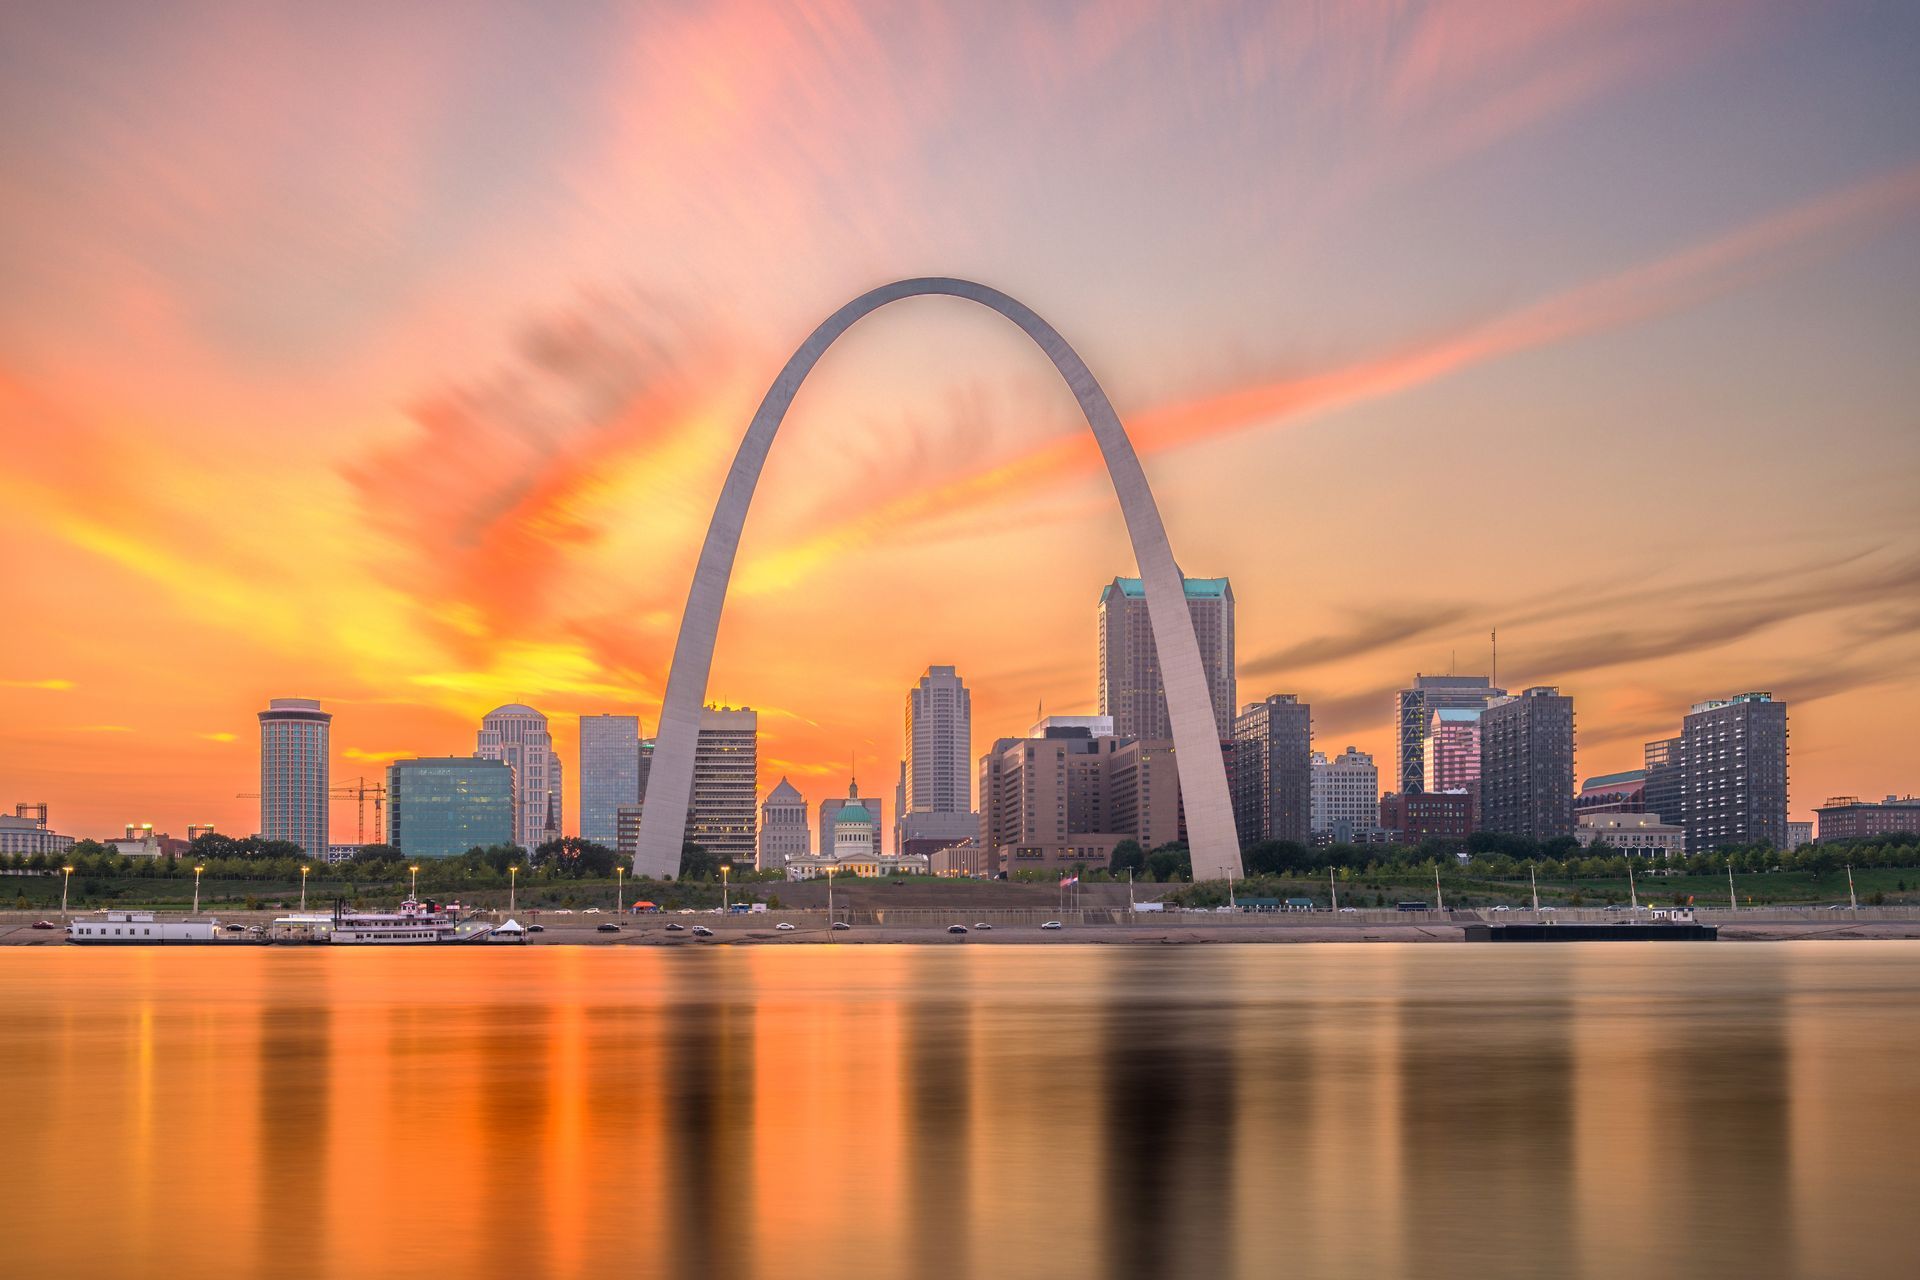 the st. louis arch is reflected in the water at sunset .